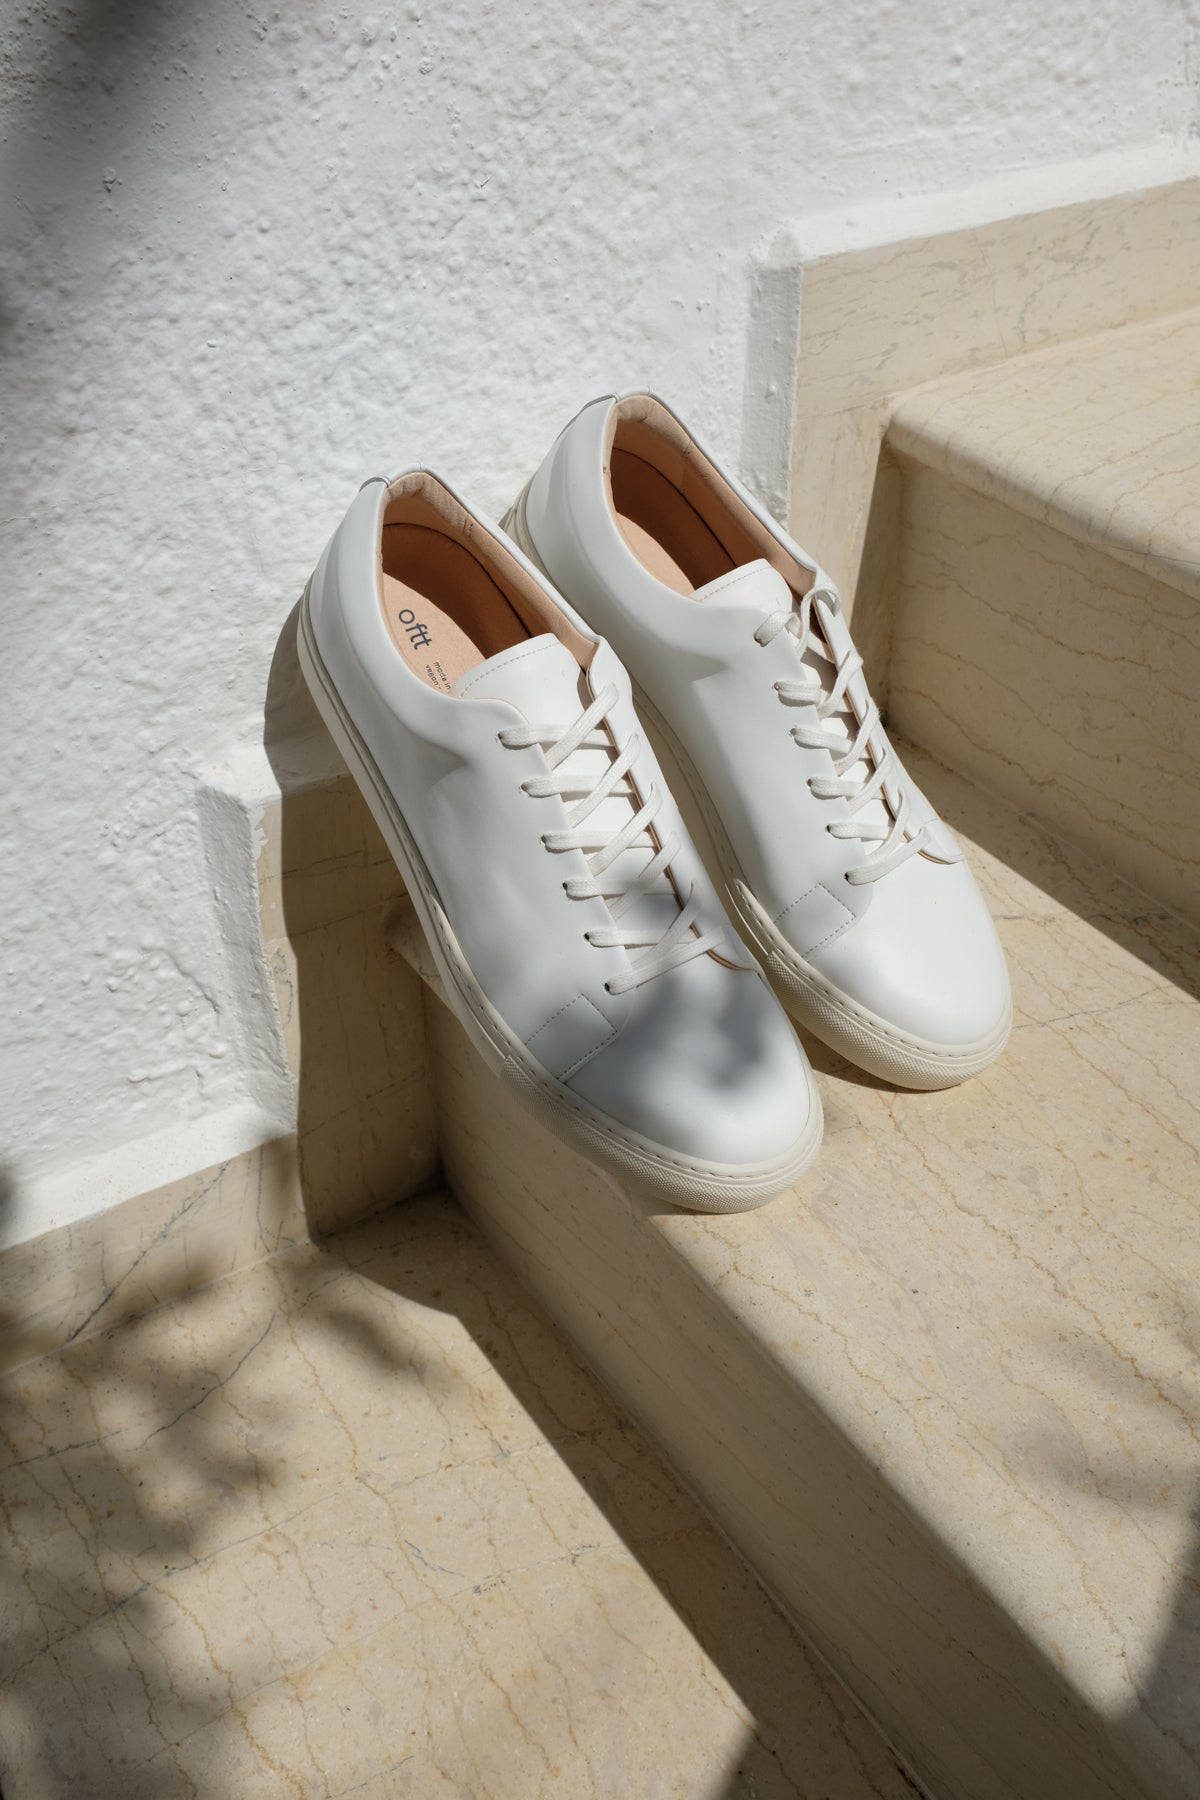 oftt - 00 - vegan trainers white-natural rubber sole, organic cotton shoe laces and recycled foam insole